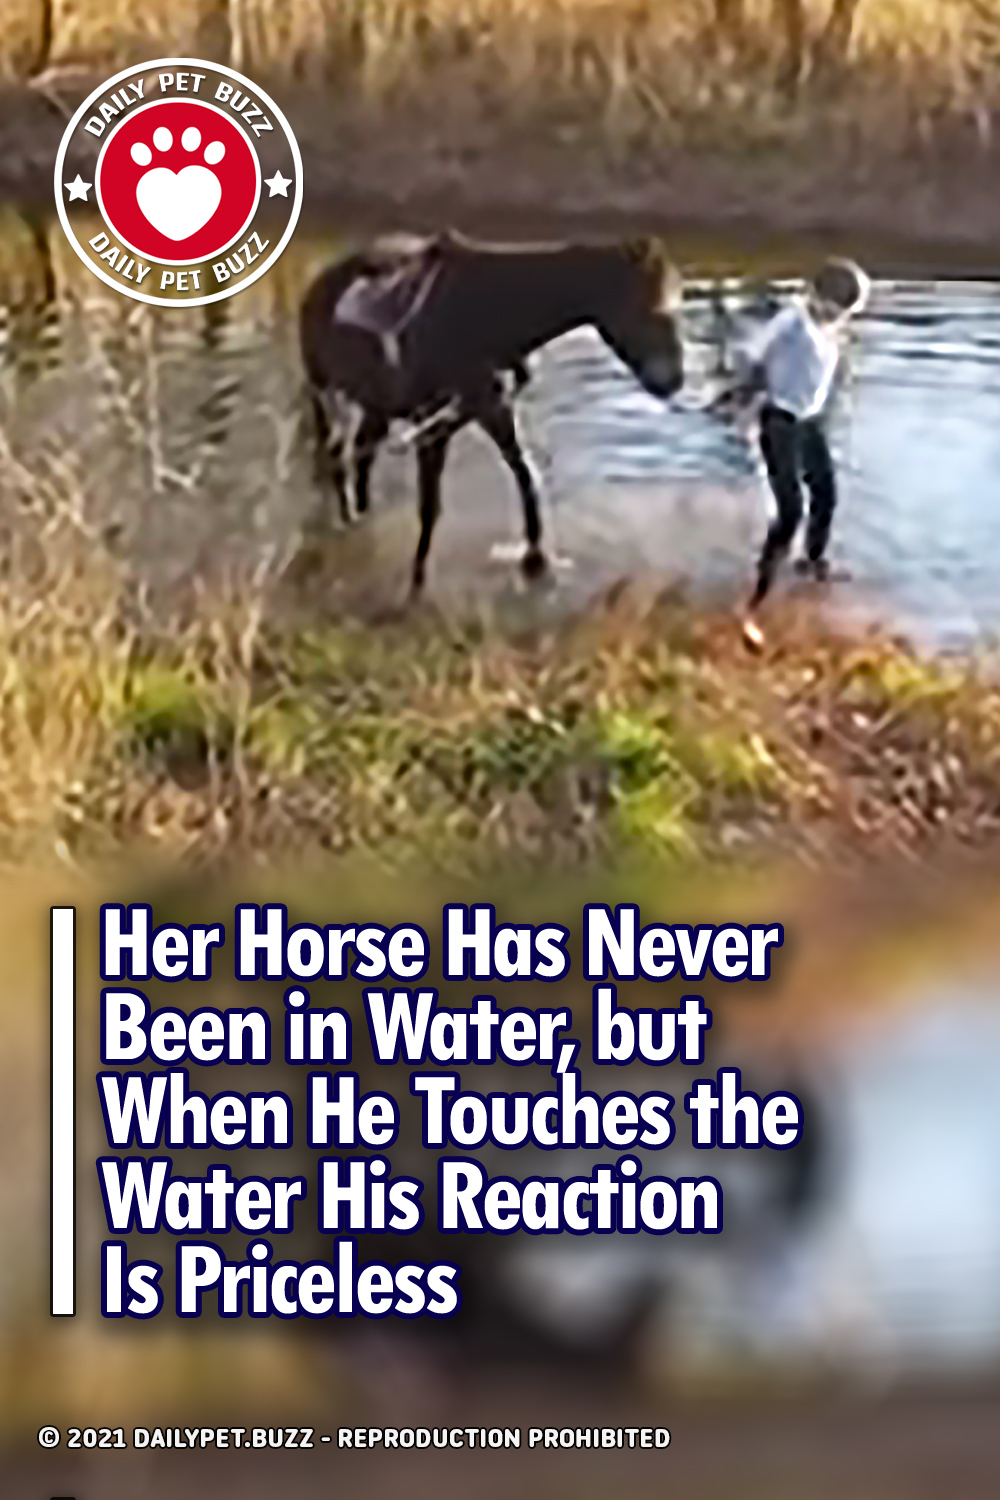 Her Horse Has Never Been in Water, but When He Touches the Water His Reaction Is Priceless